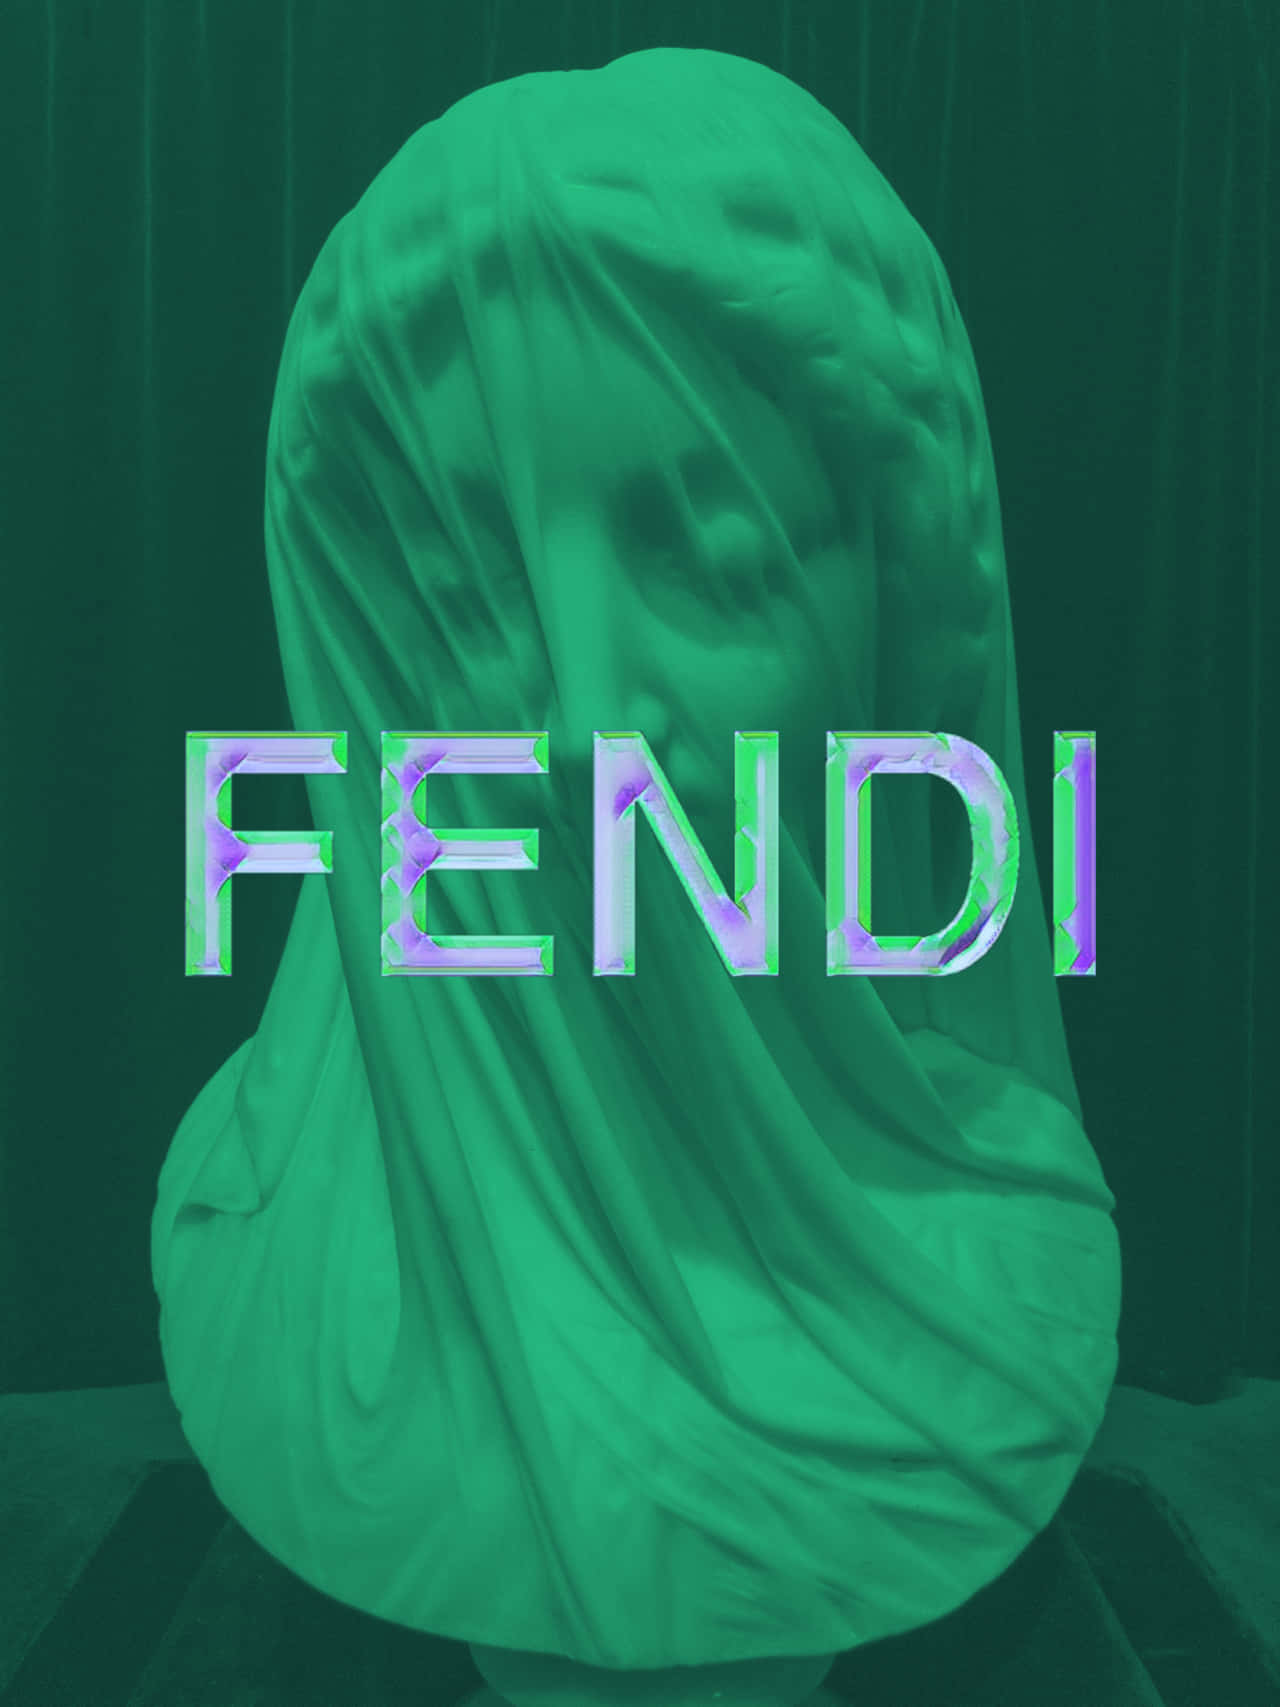 Download Fendi - A Sculpture With The Words Fendi On It | Wallpapers.com